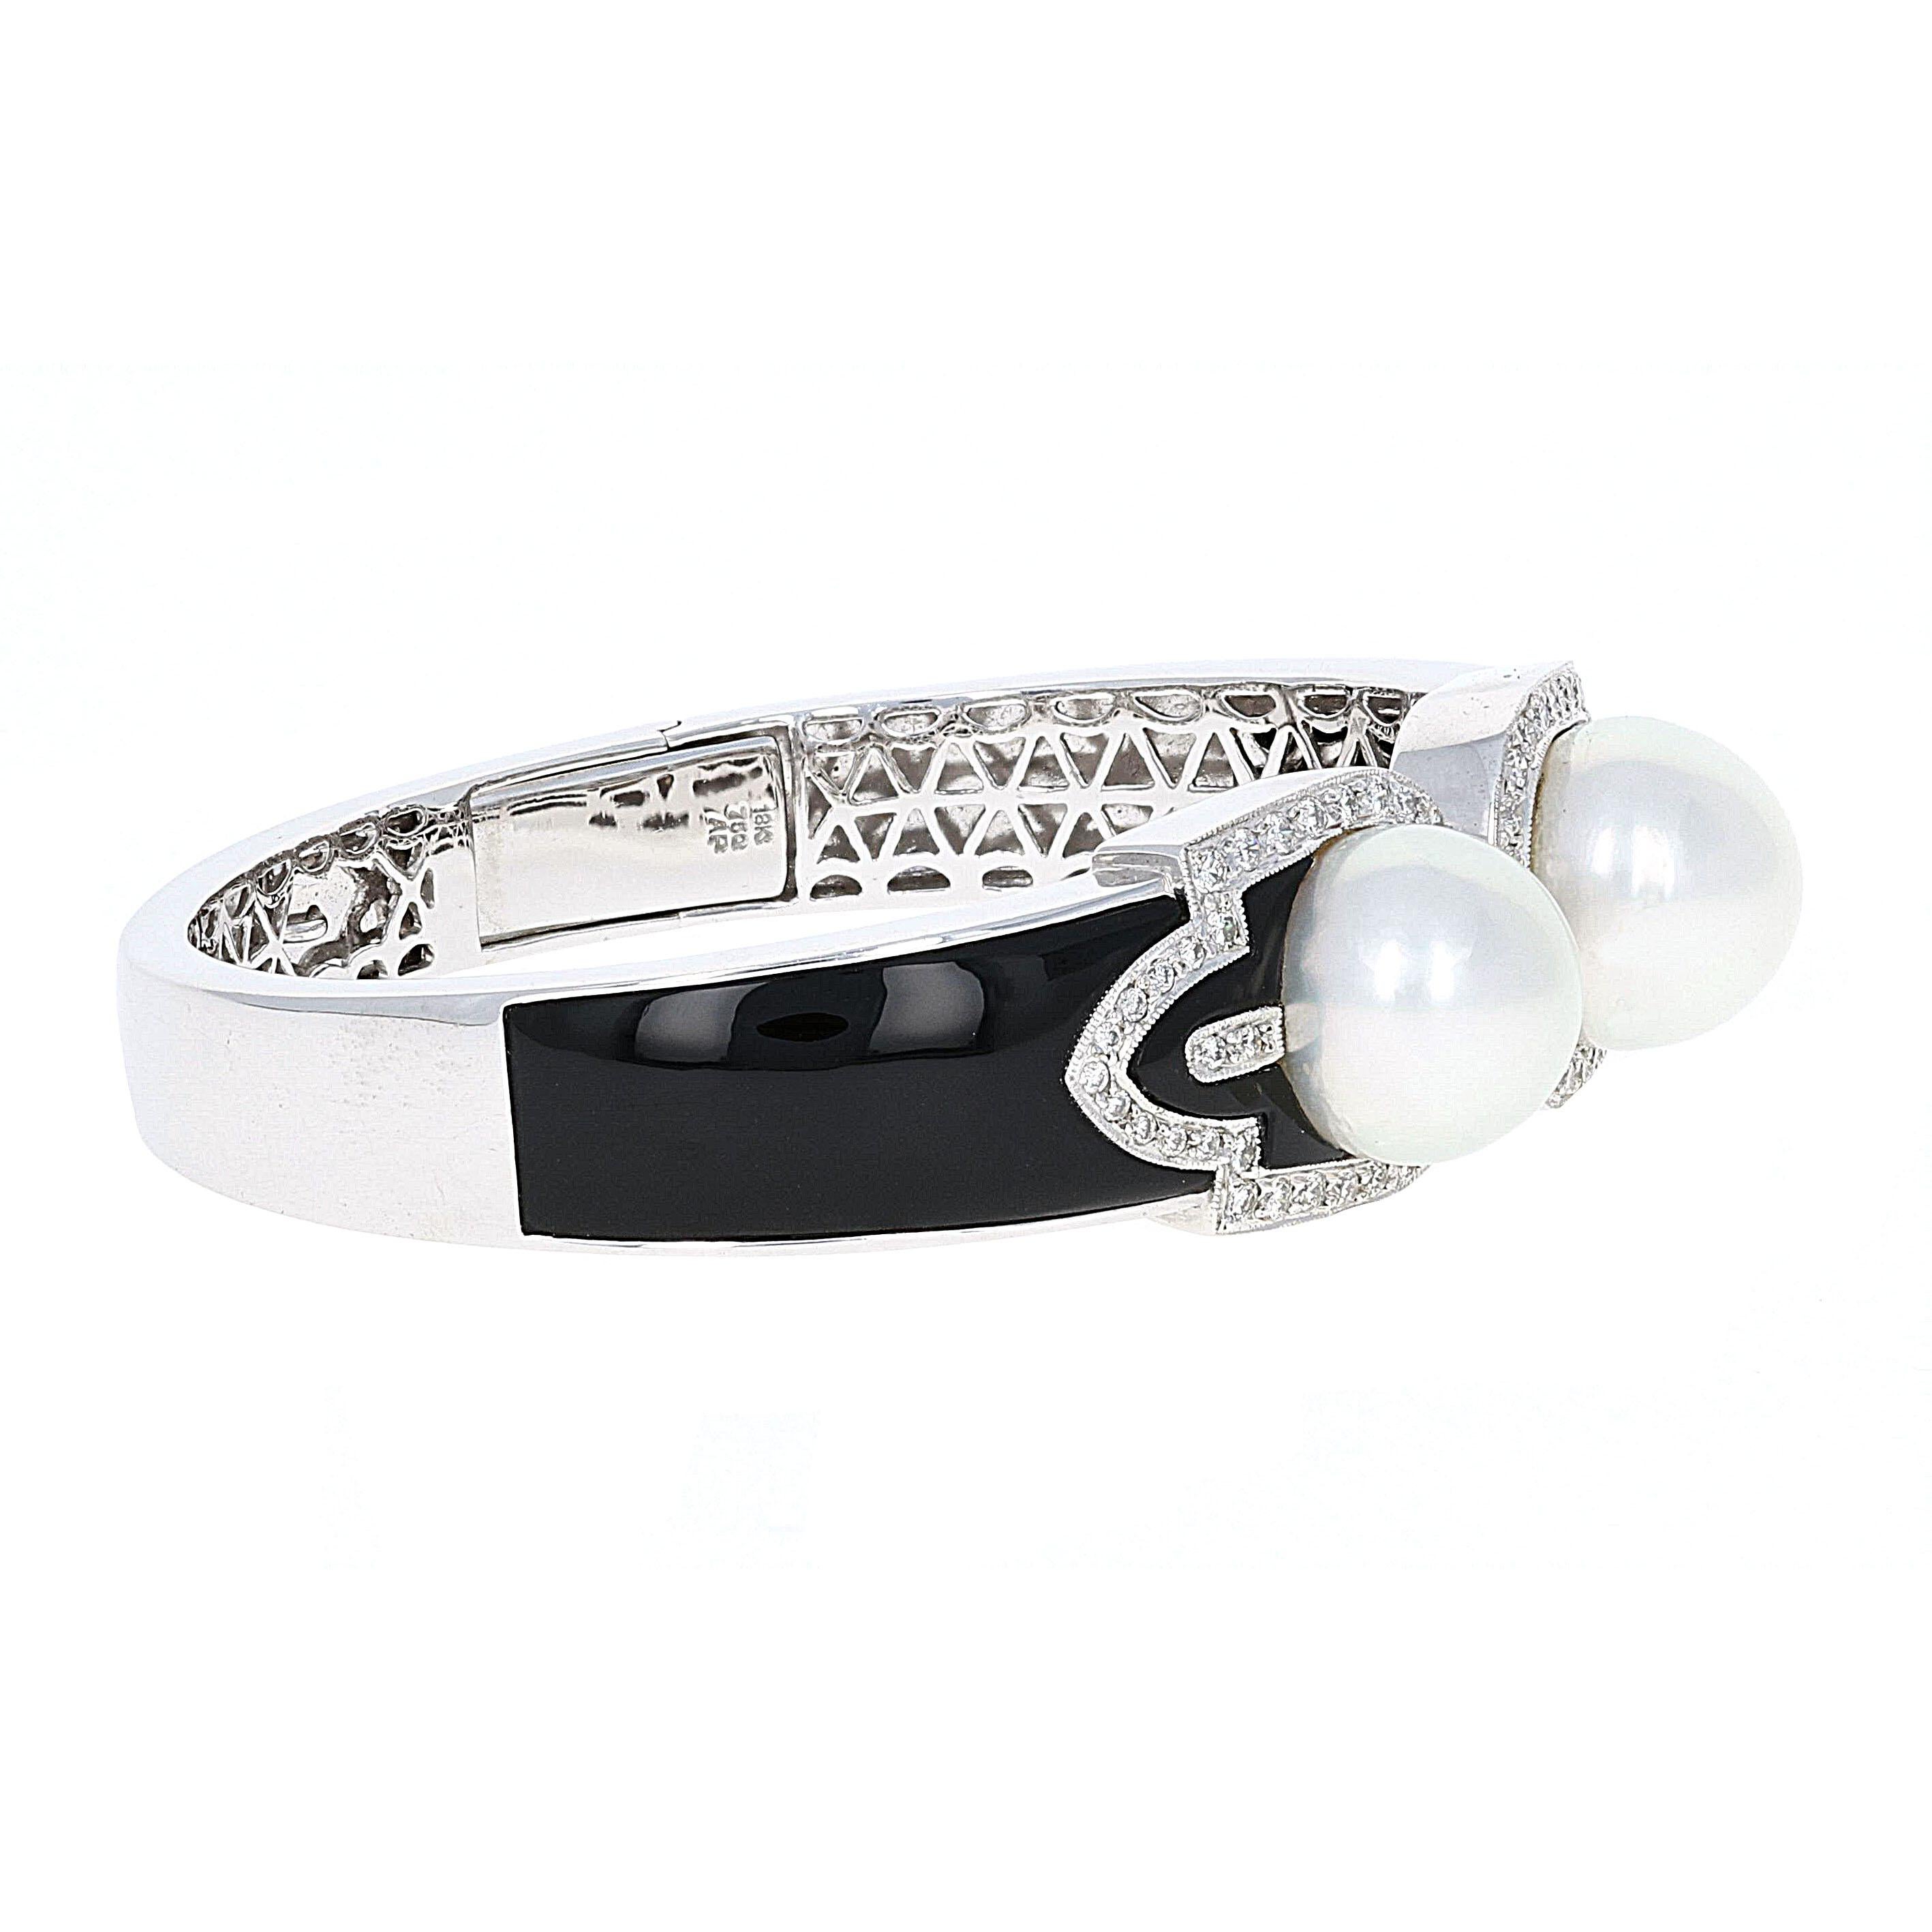 Truly a beautiful piece of jewelry to be enjoyed for years to come. This 1940s inspired bangle bracelet is crafted with 2 large pearls and surrounded by diamonds. The diamonds are very high quality and the onyx is in excellent condition. This is